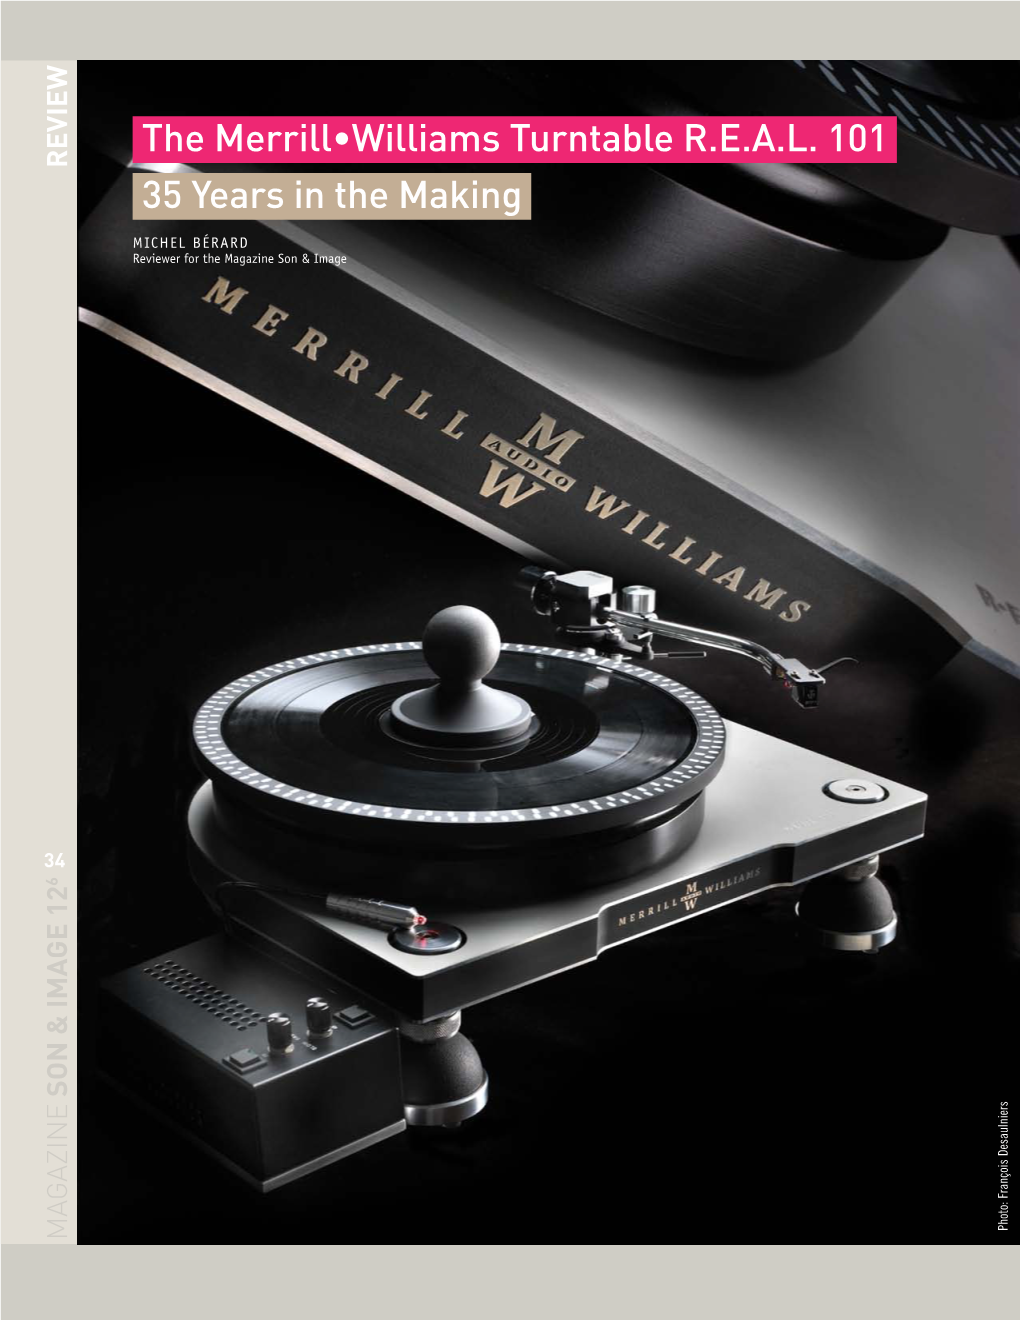 The Merrill•Williams Turntable R.E.A.L. 101 35 Years in the Making